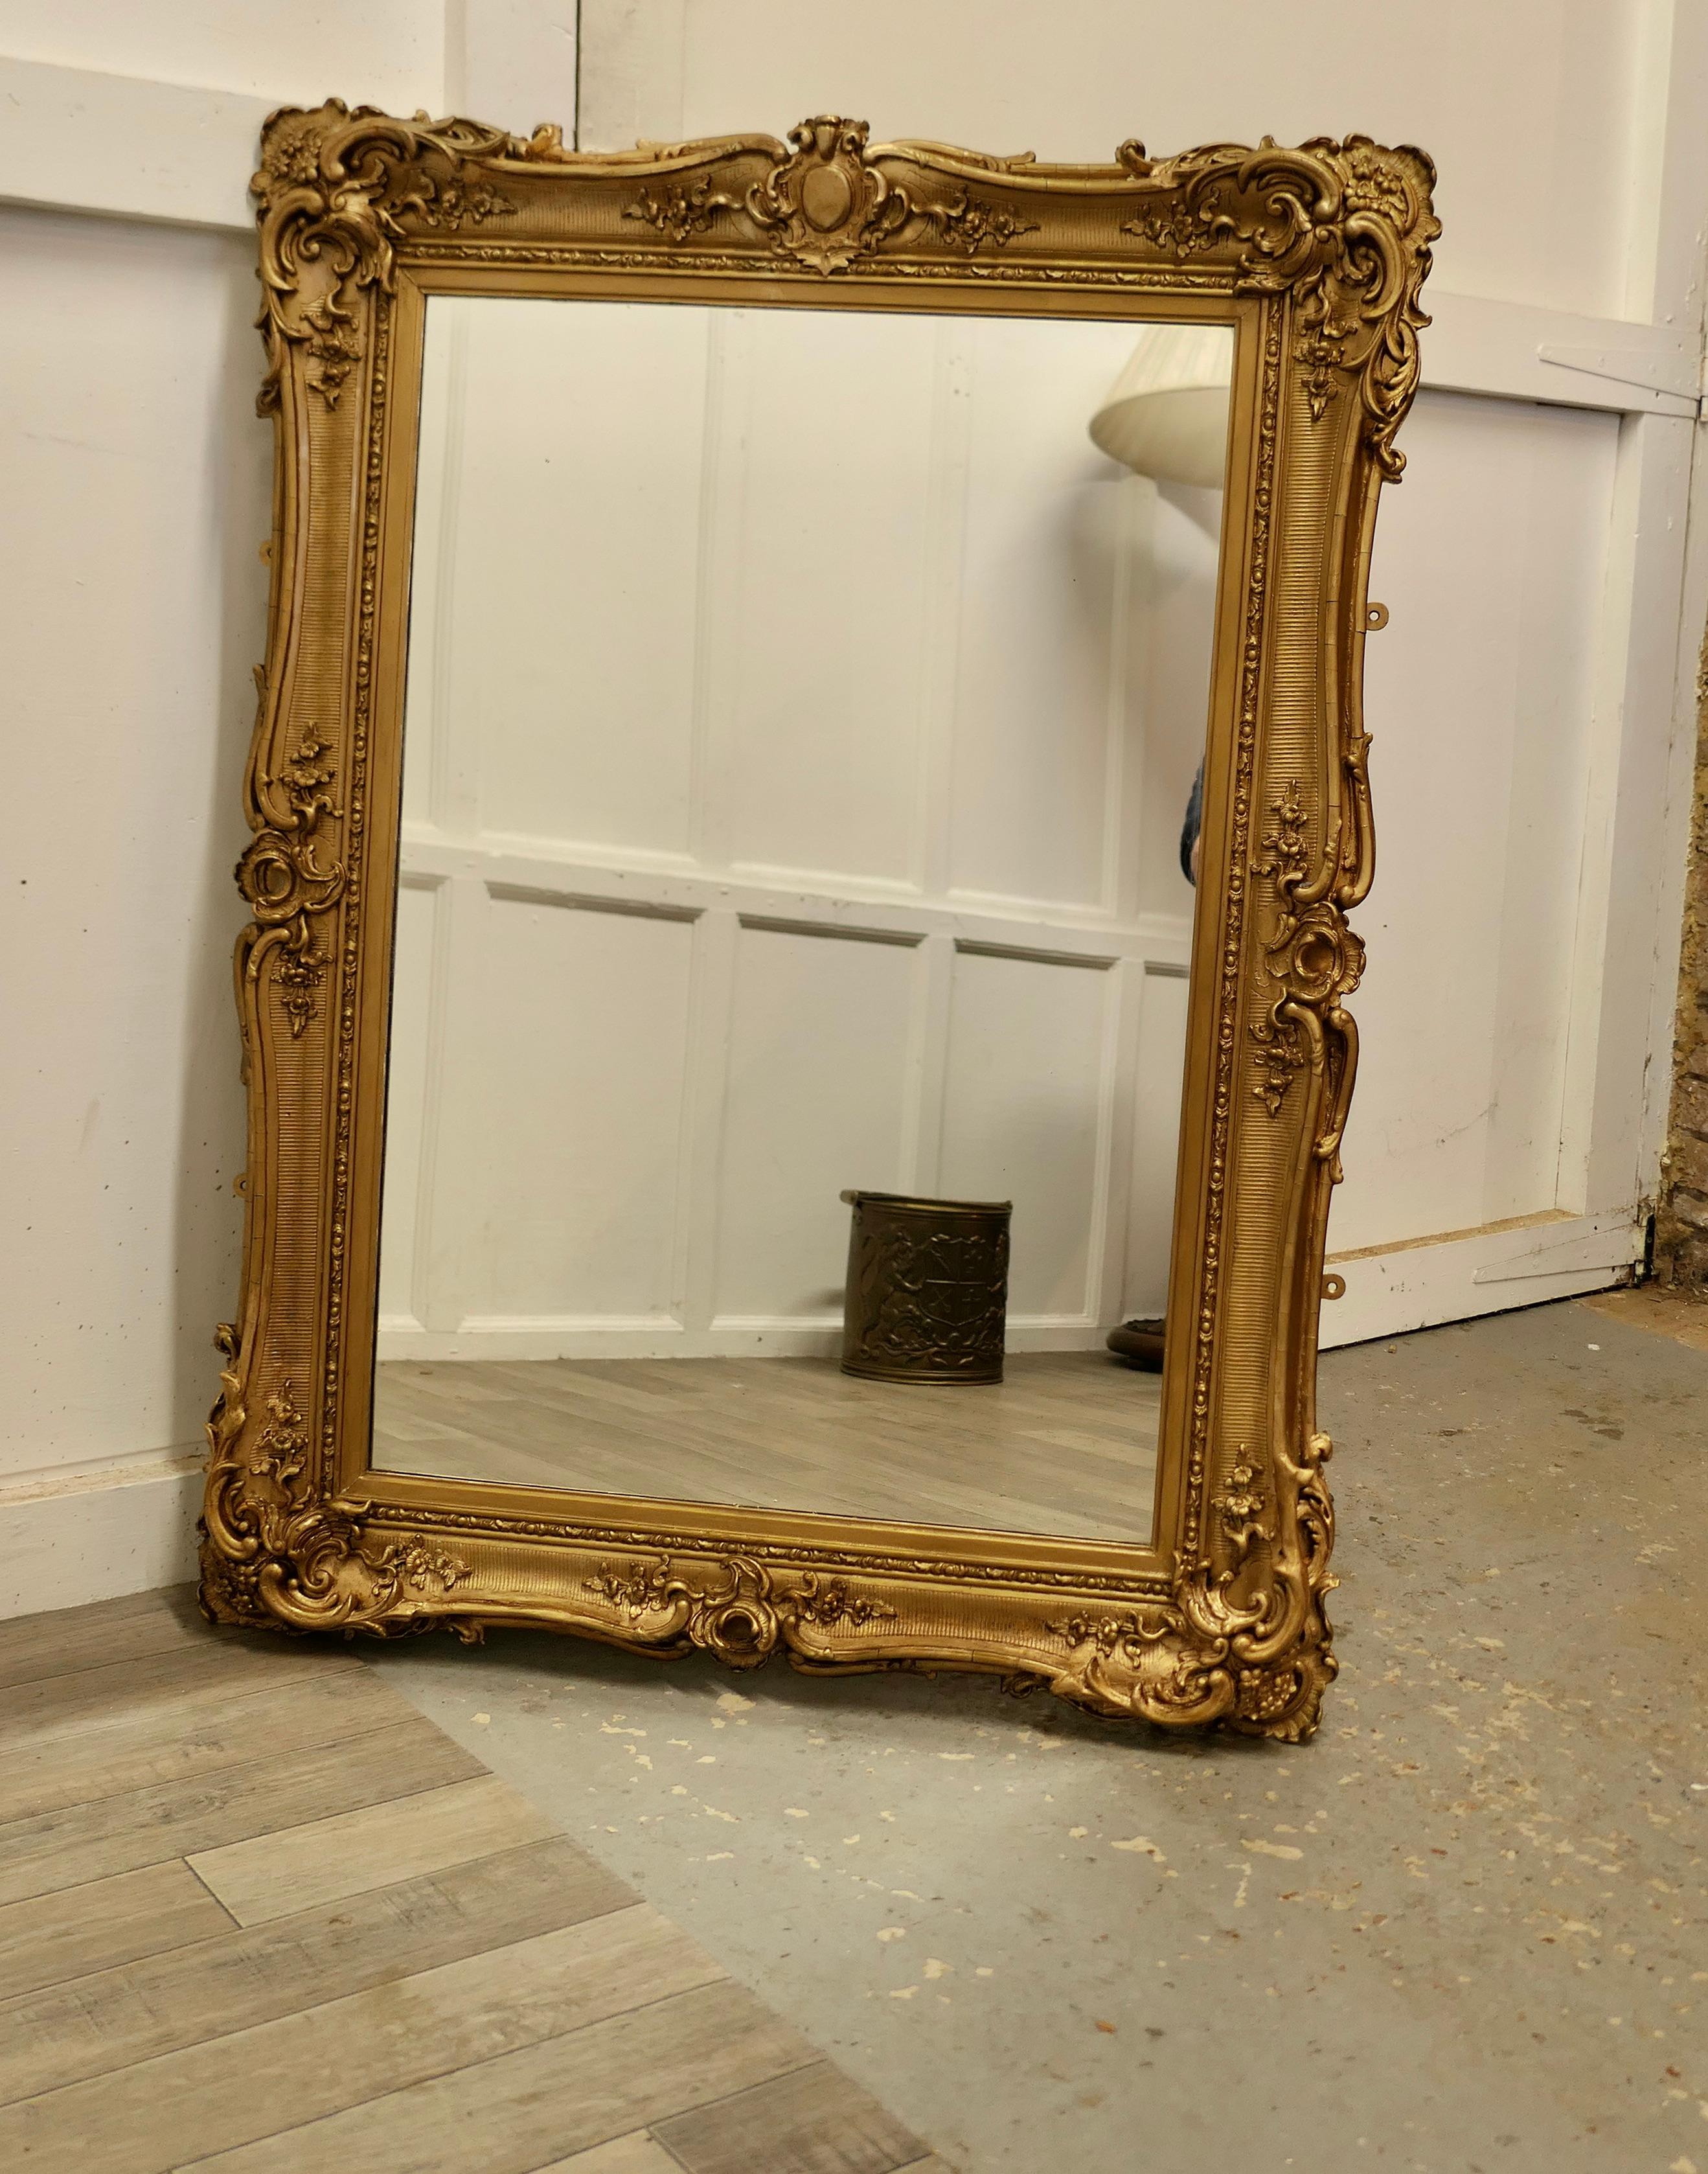 Large gilt rococo wall mirror.

The mirror is in a 5” wide decorate gilt Rococo Style frame 
This is a beautiful and quite elaborate piece, the glass and frame are in good antique condition 
The overall size is 45” high, 34” wide and it is 3”